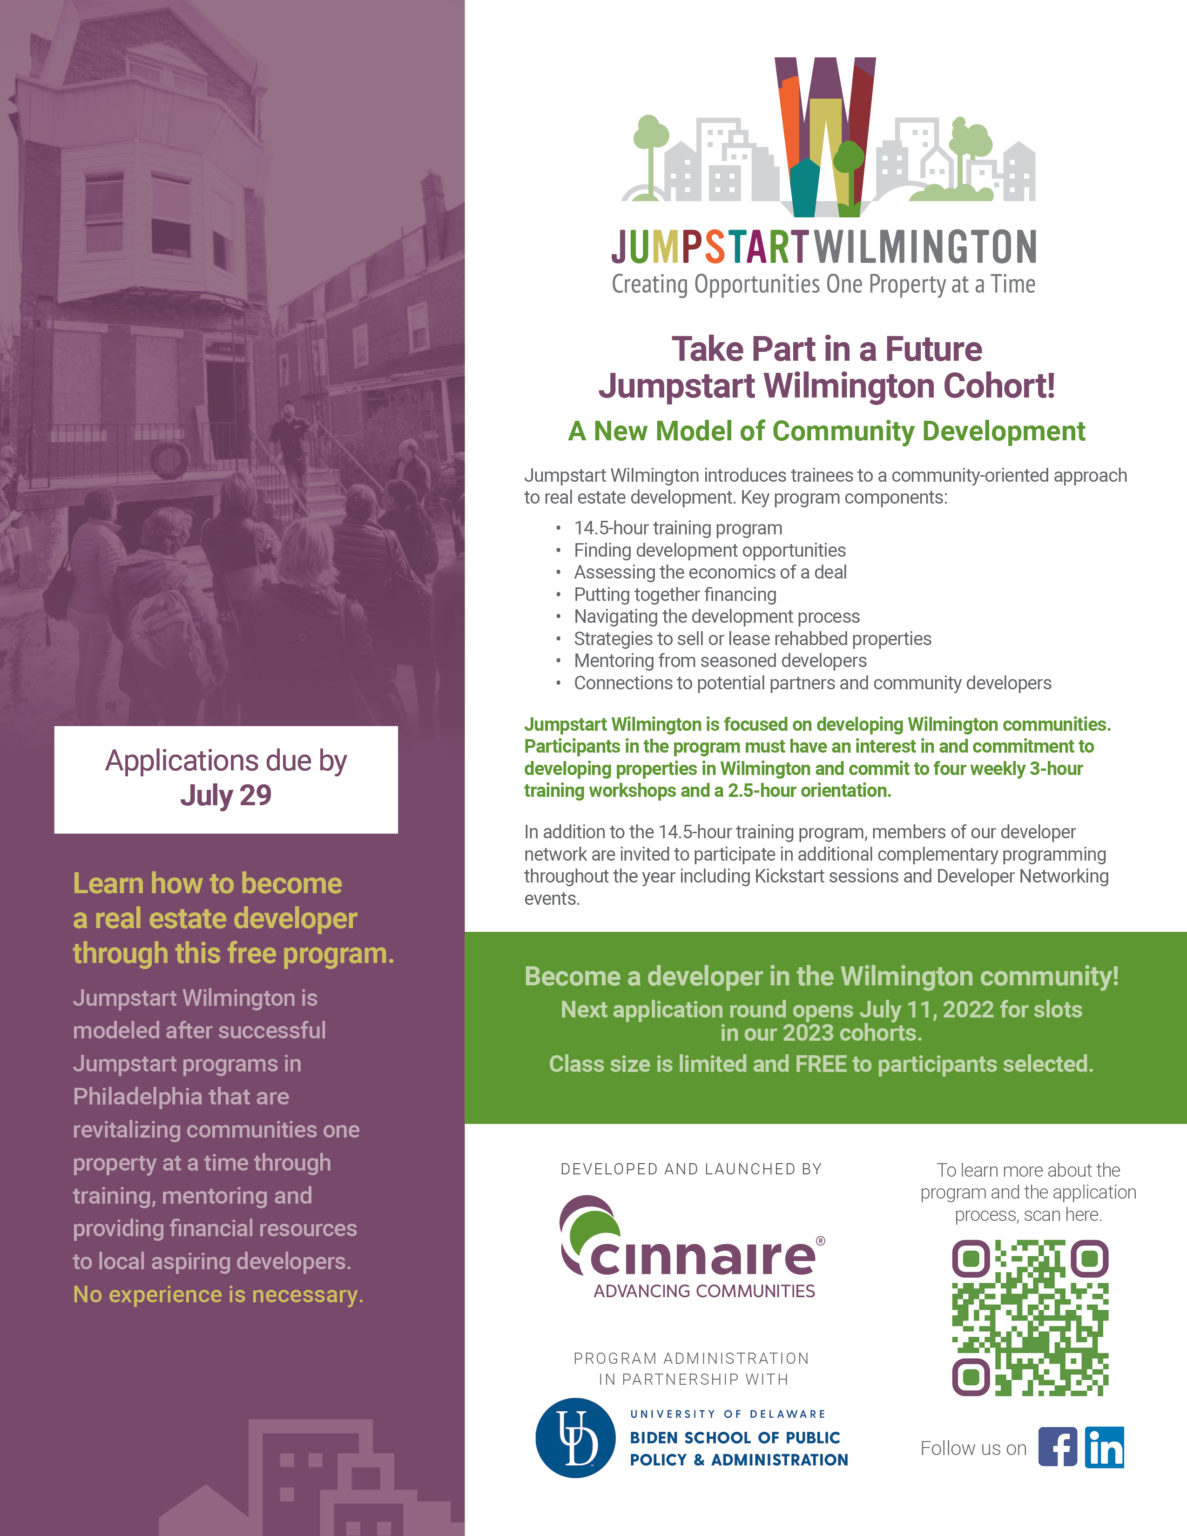 Coming Soon 2023 Jumpstart Wilmington Application Round Opens 7/11/22